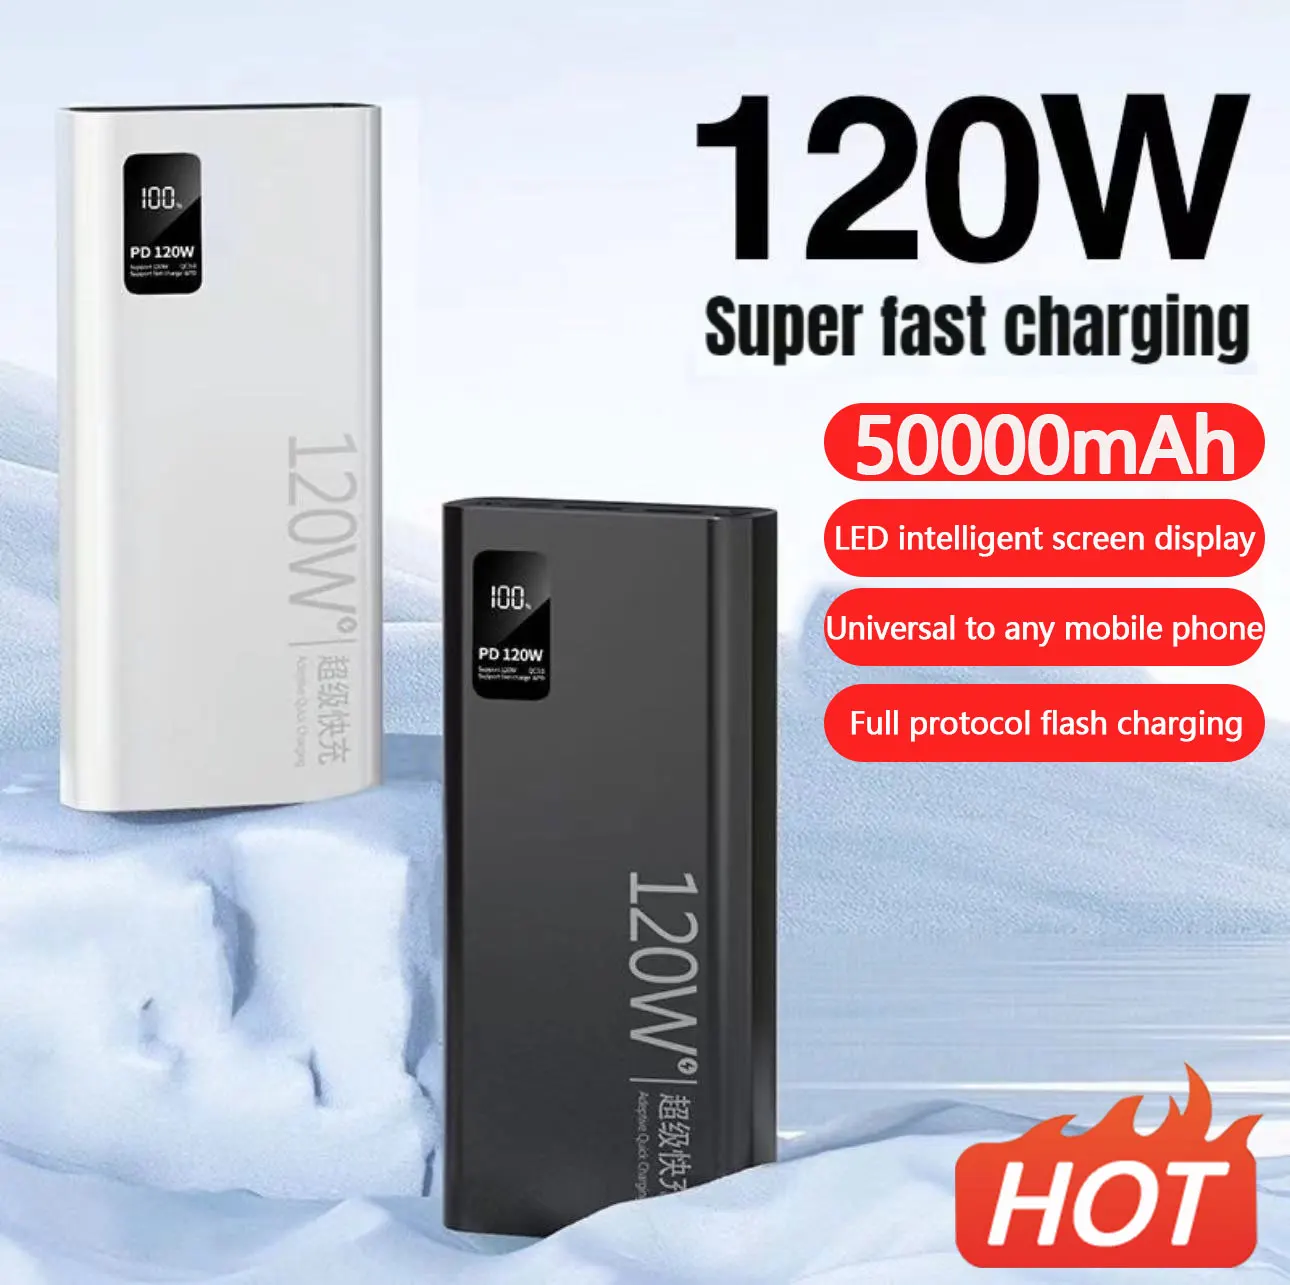 

120W Super Fast Charging 50000mAh Power Bank with 100% Sufficient Capacity for Mobile Power Supply for Various Mobile Phones